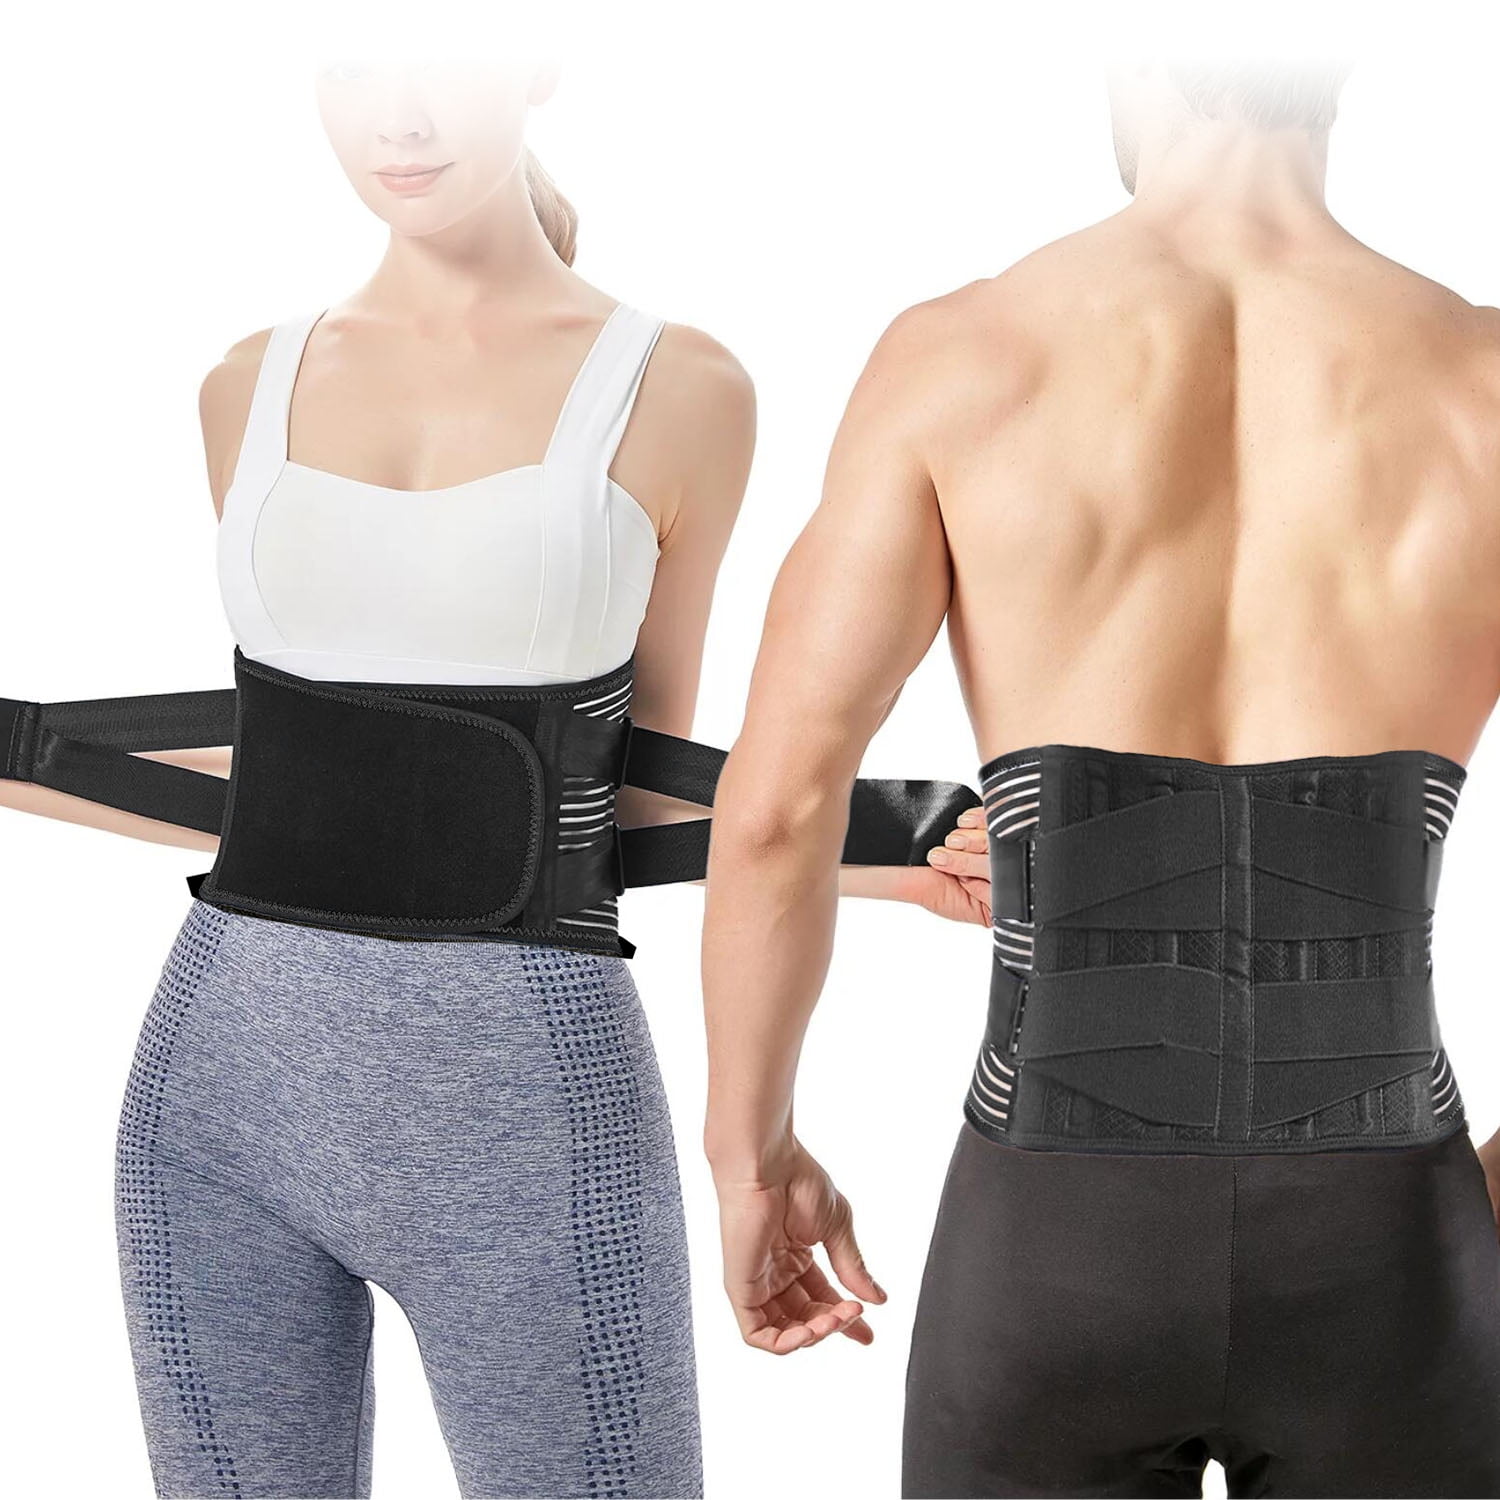 NYOrtho Back Brace Lumbar Support Belt - For Men And Women, Instantly  Relieve Lower Back Pain, Maximum Posture And Spine Support, Adjustable,  Breathable With Removable Suspenders